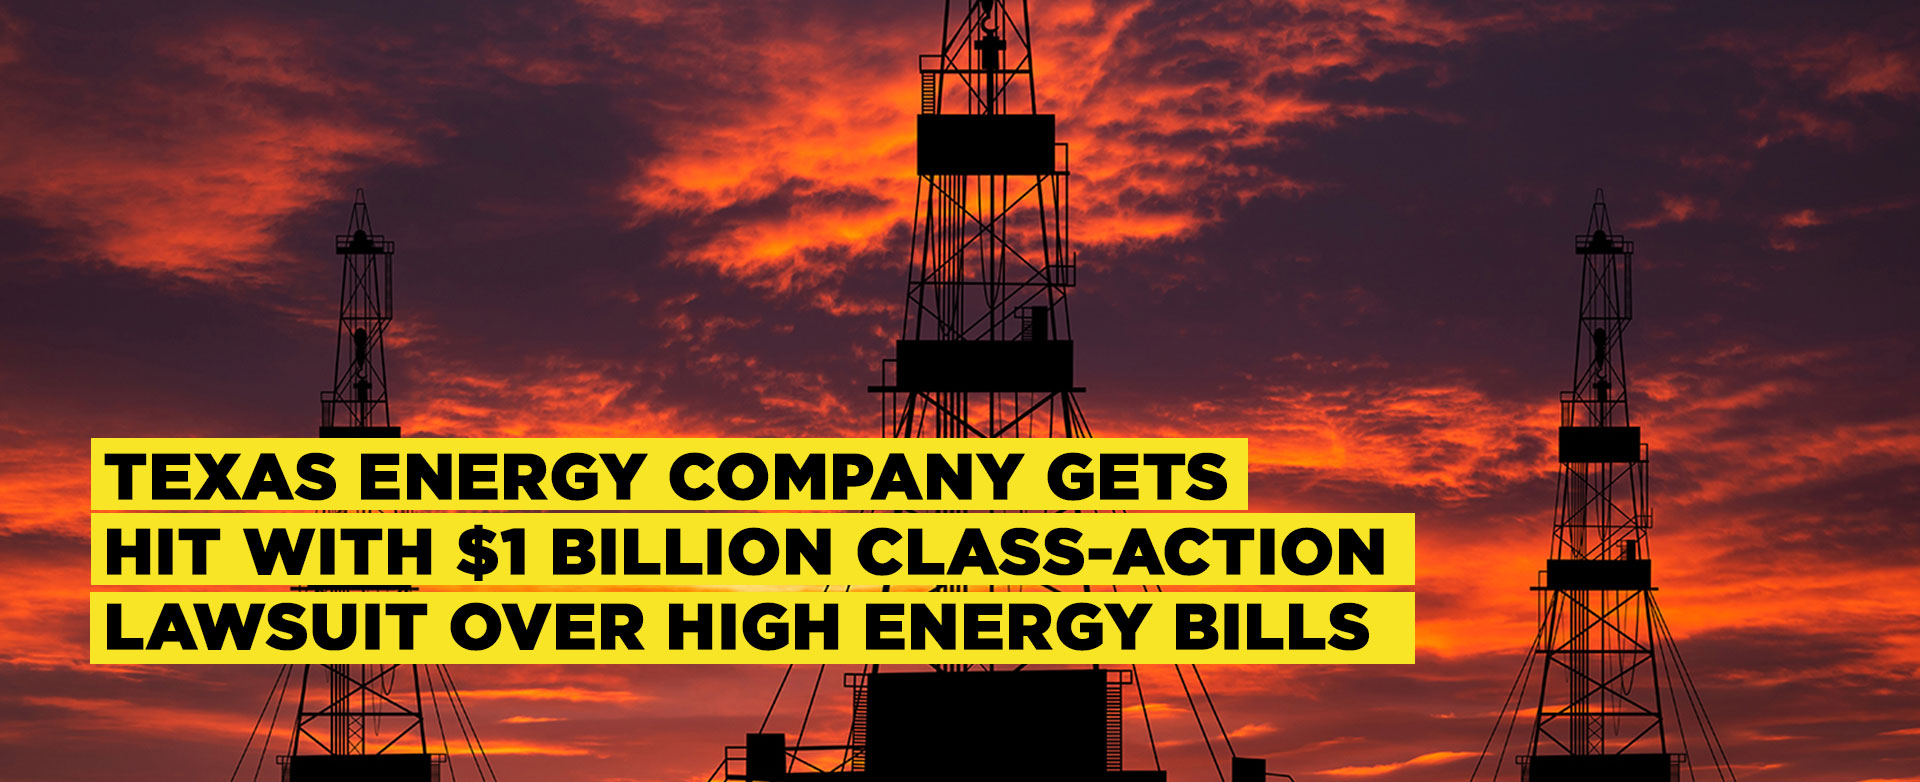 texas-energy-company-gets-hit-with-1-billion-class-action-lawsuit-over